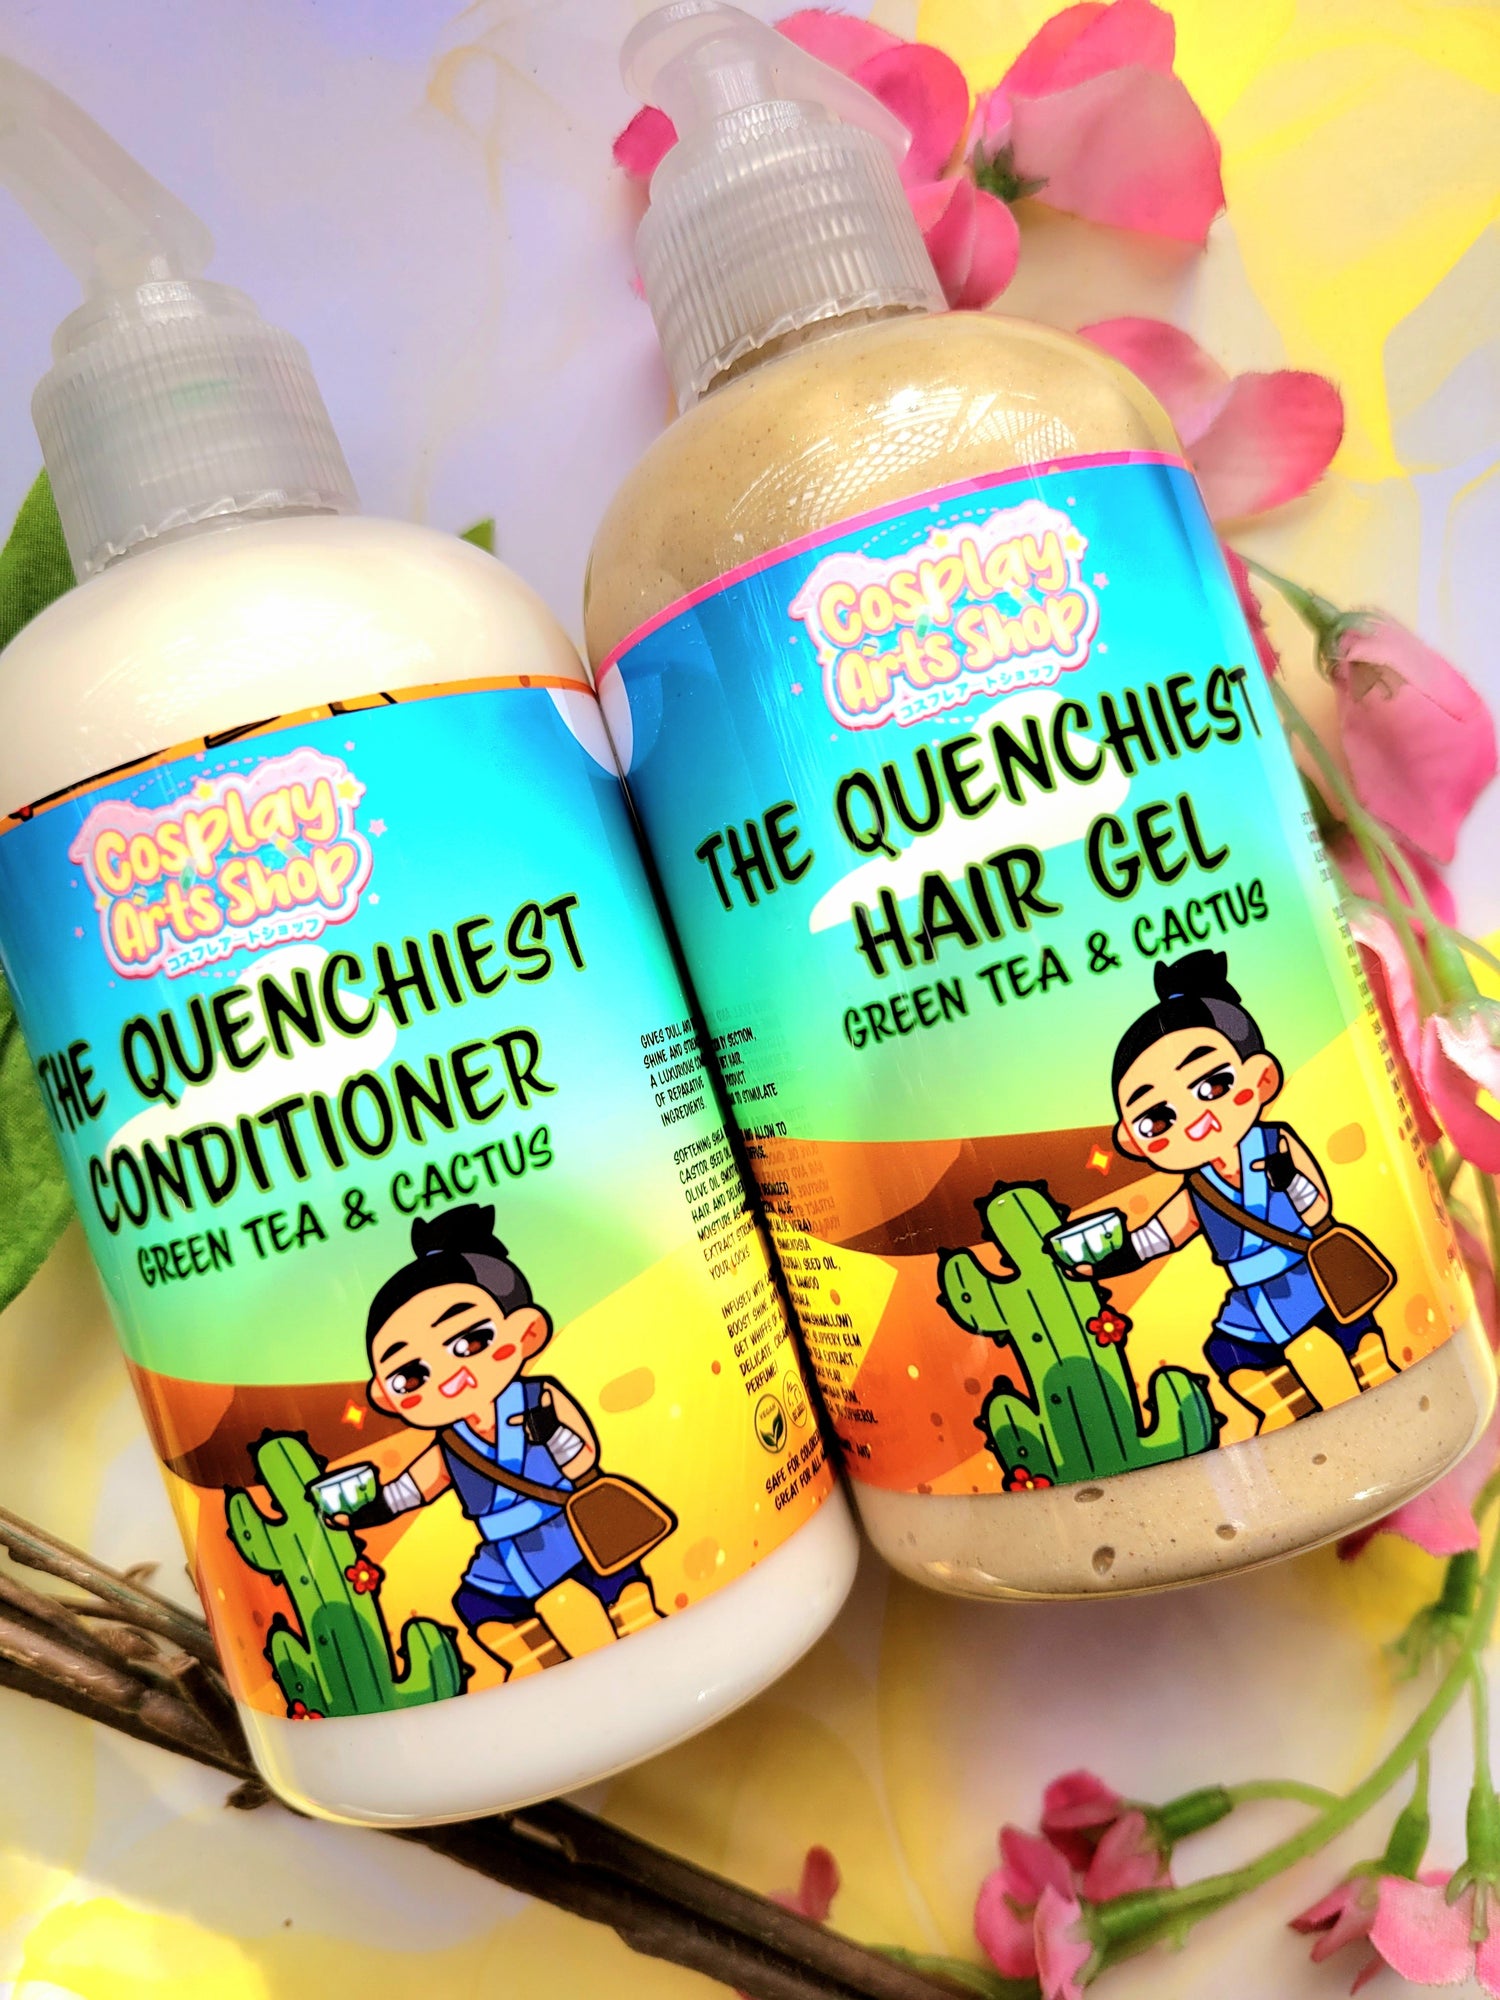 The Quenchiest Hair Gel - Cosplay Arts Shop